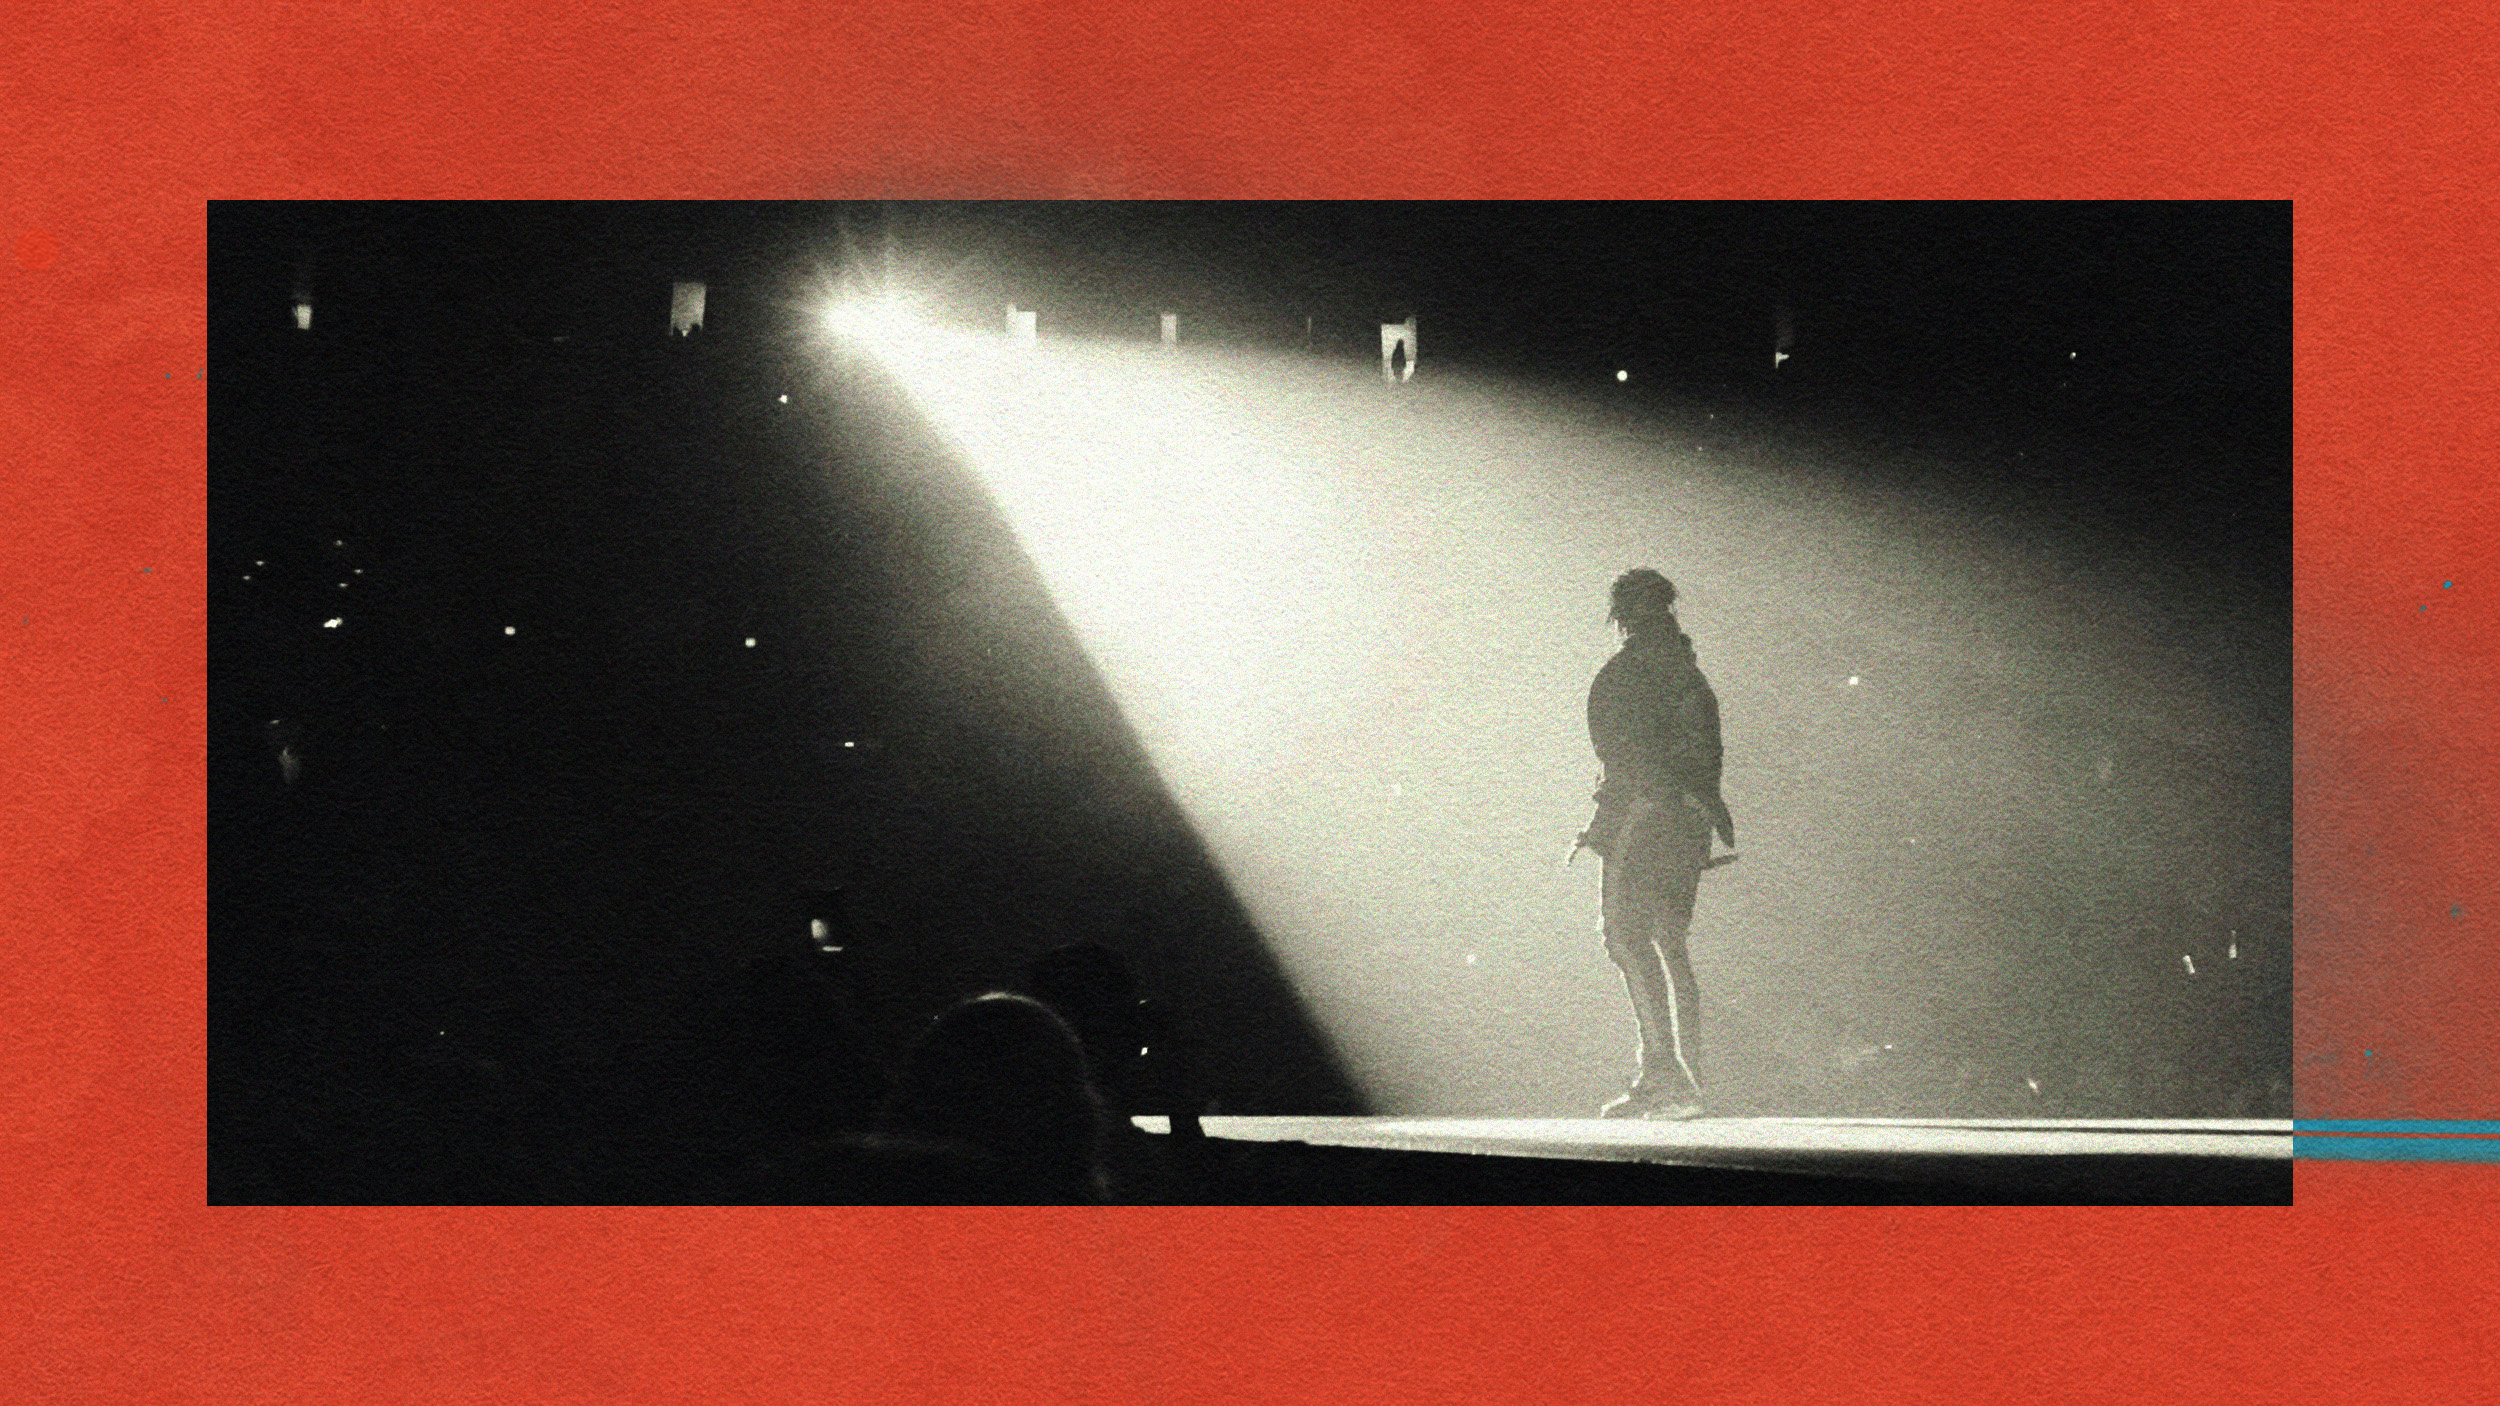 Black and white photo of a person on stage, the spotlight effect illuminating them from behind, casting dramatic shadows. A red border frames the image.